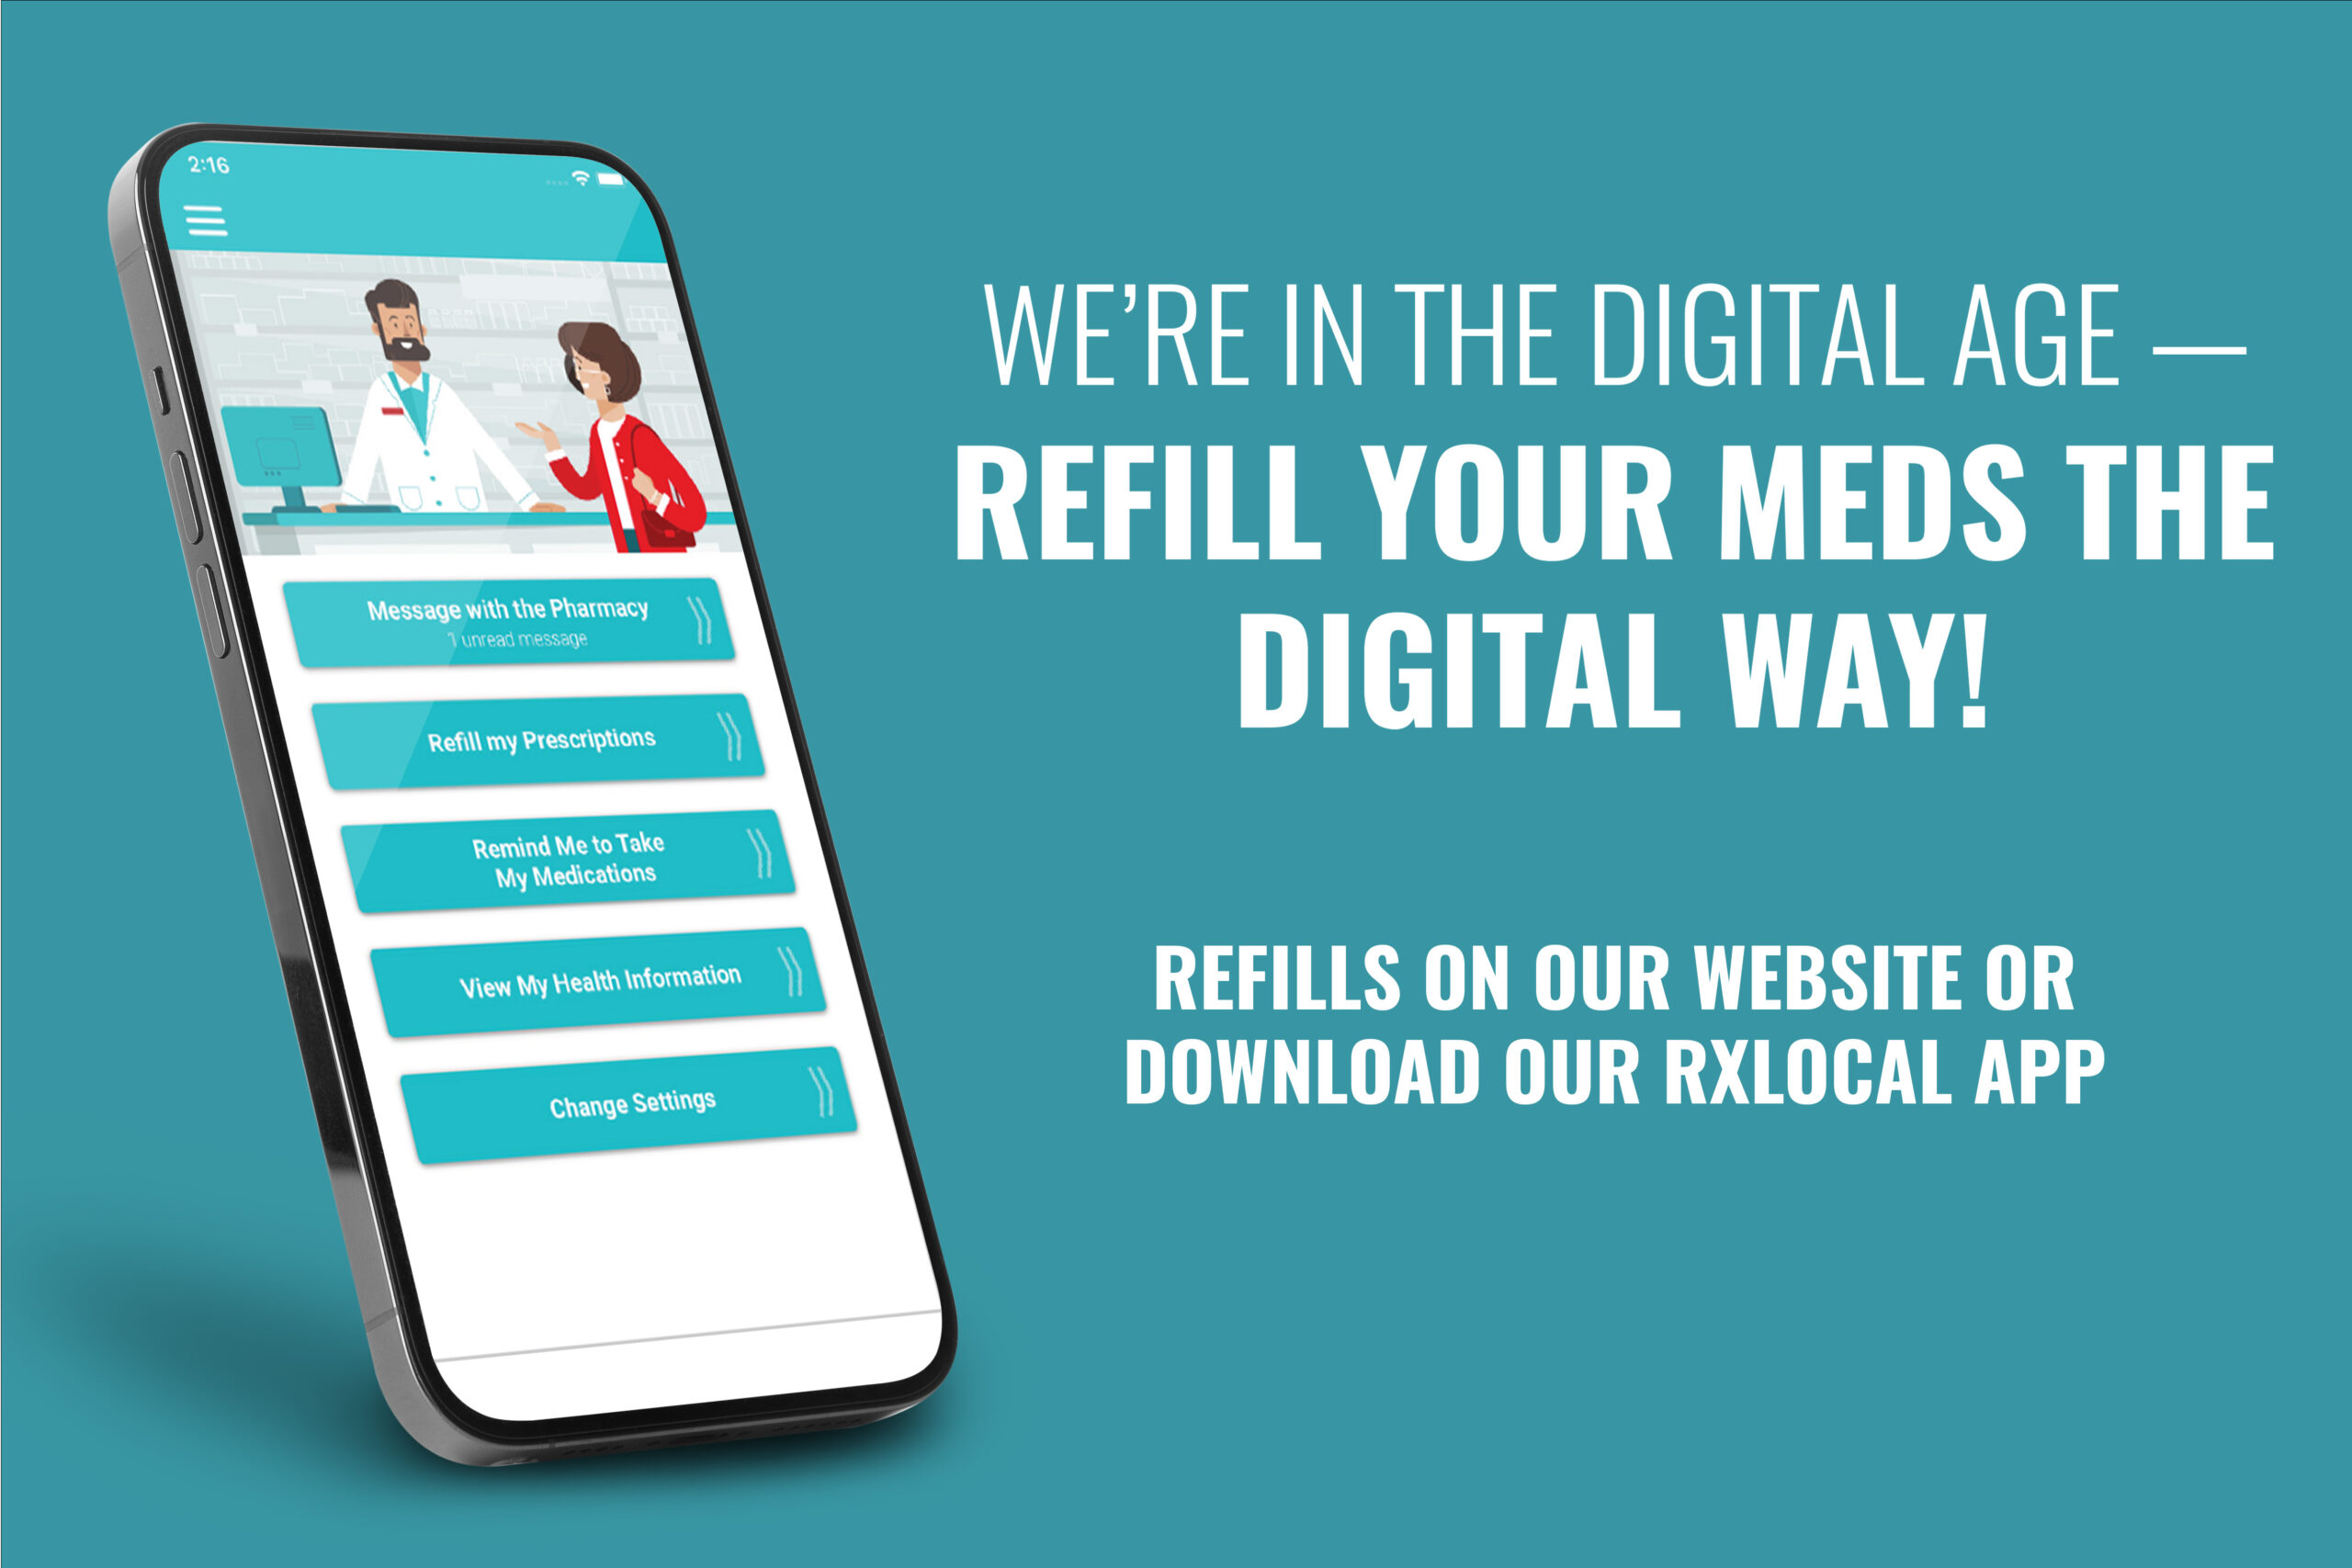 we're in the digital age - refill your meds the digital way! refills on our website or download our rxlocal app